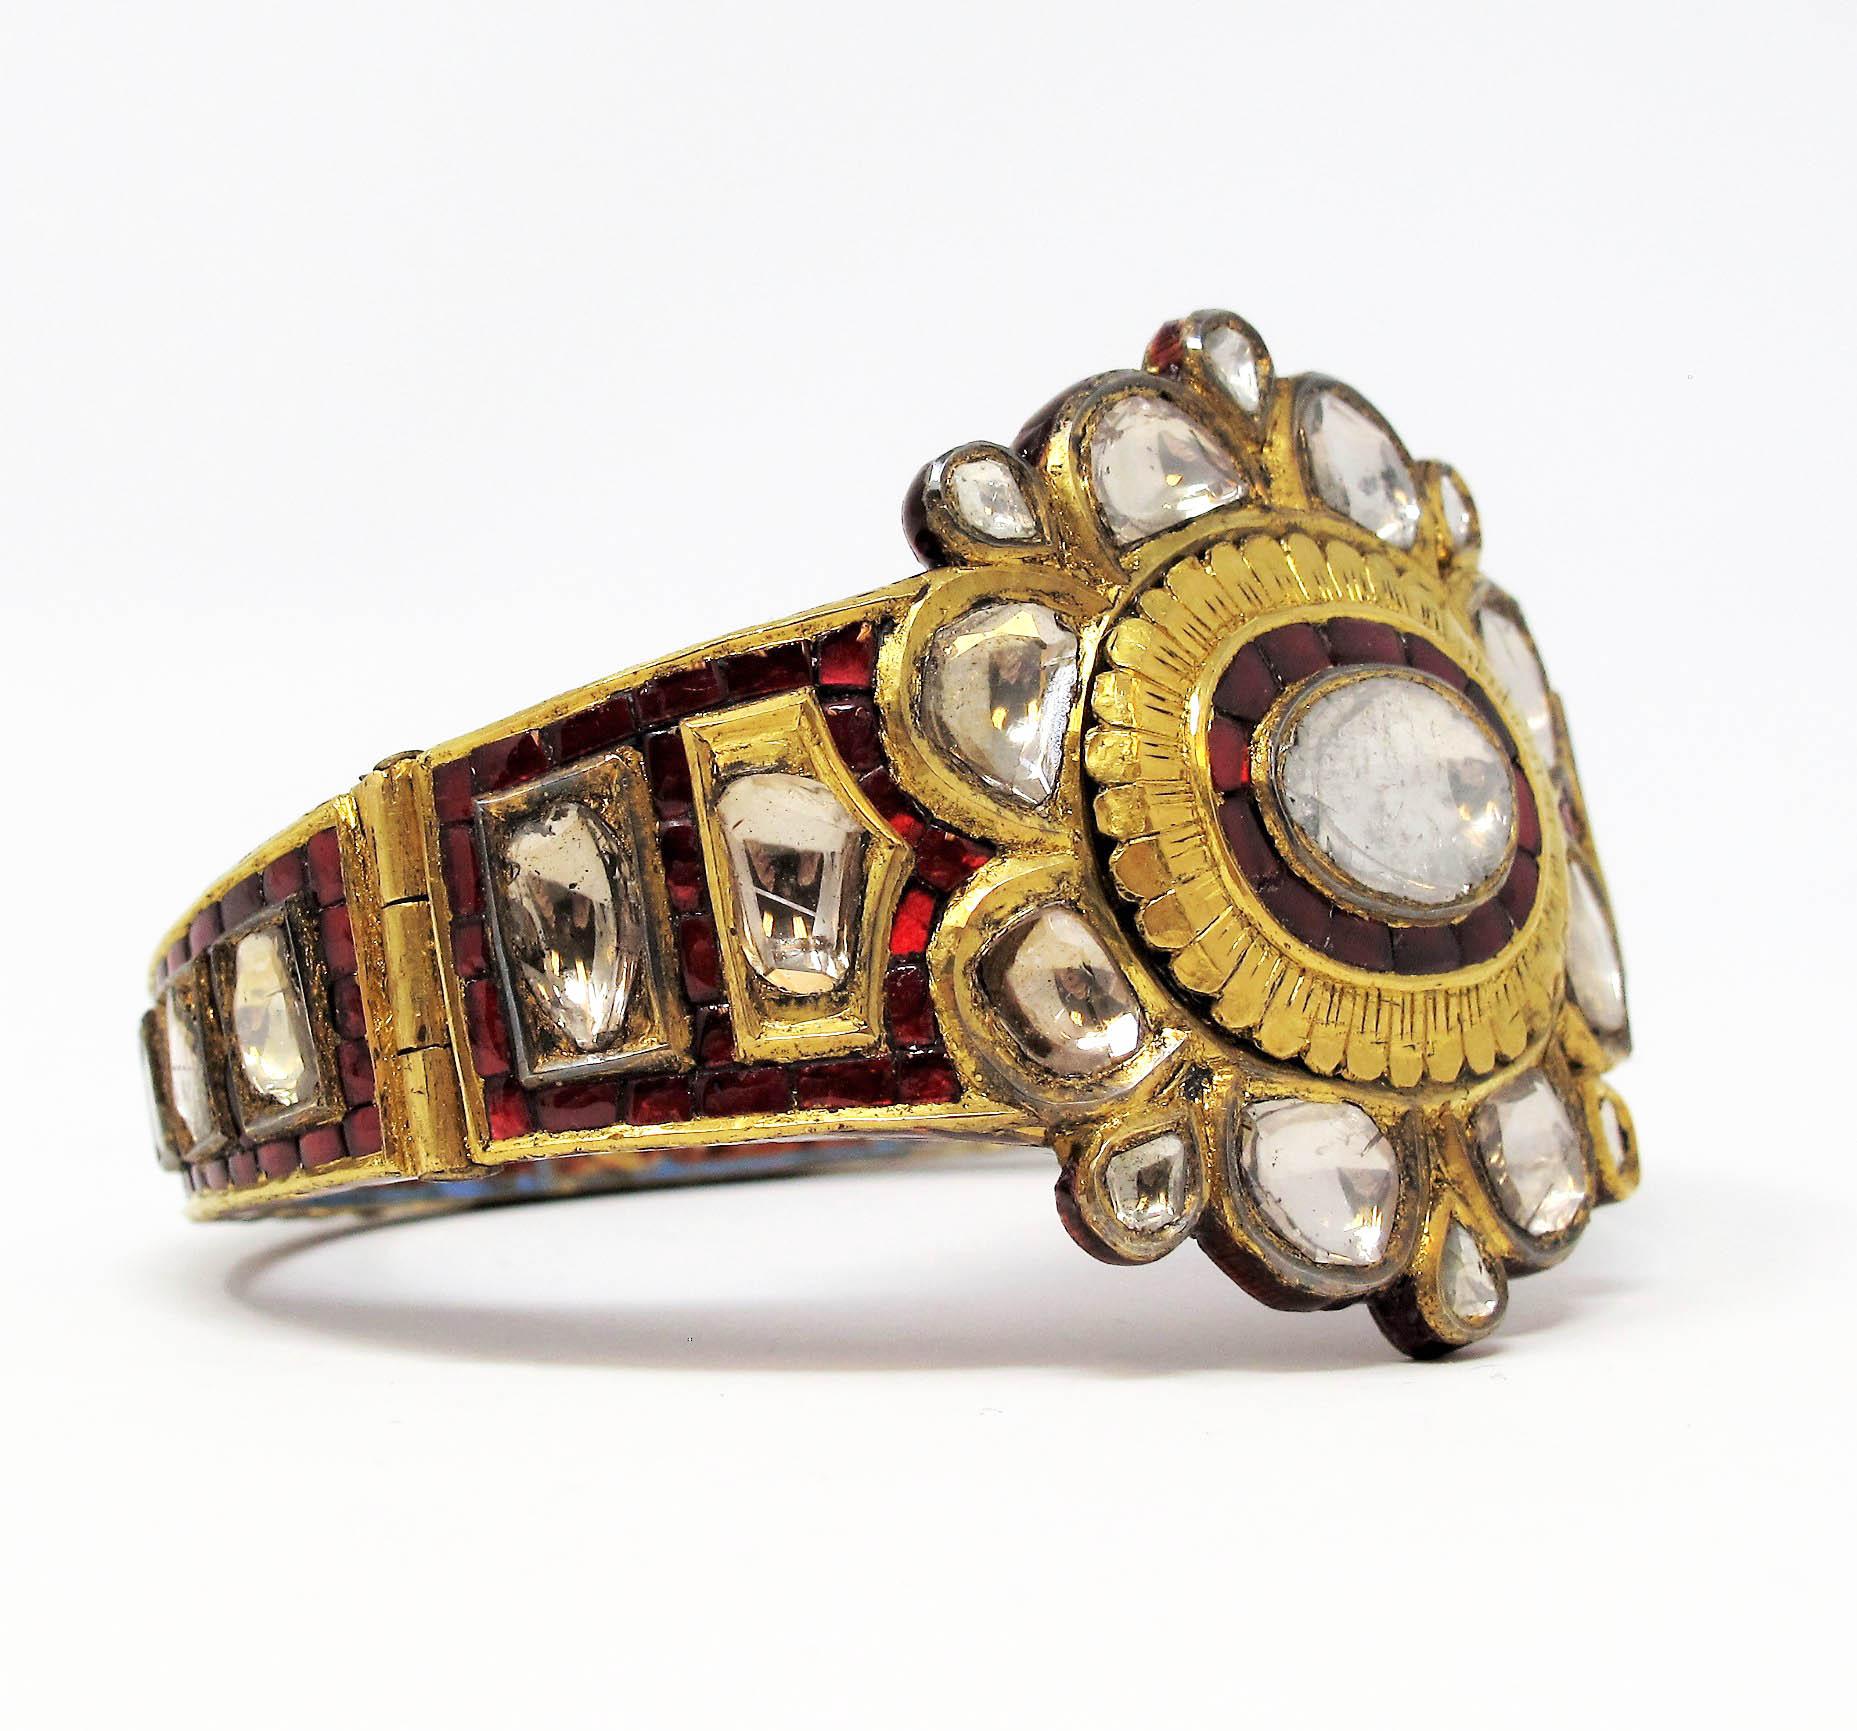 Incredible vintage Polki diamond bangle bracelet is an absolute work of art for your wrist! This stunning piece features an 18 karat gold and enamel bodice embellished with rounded rough cut diamonds throughout. The bold color and stunning,